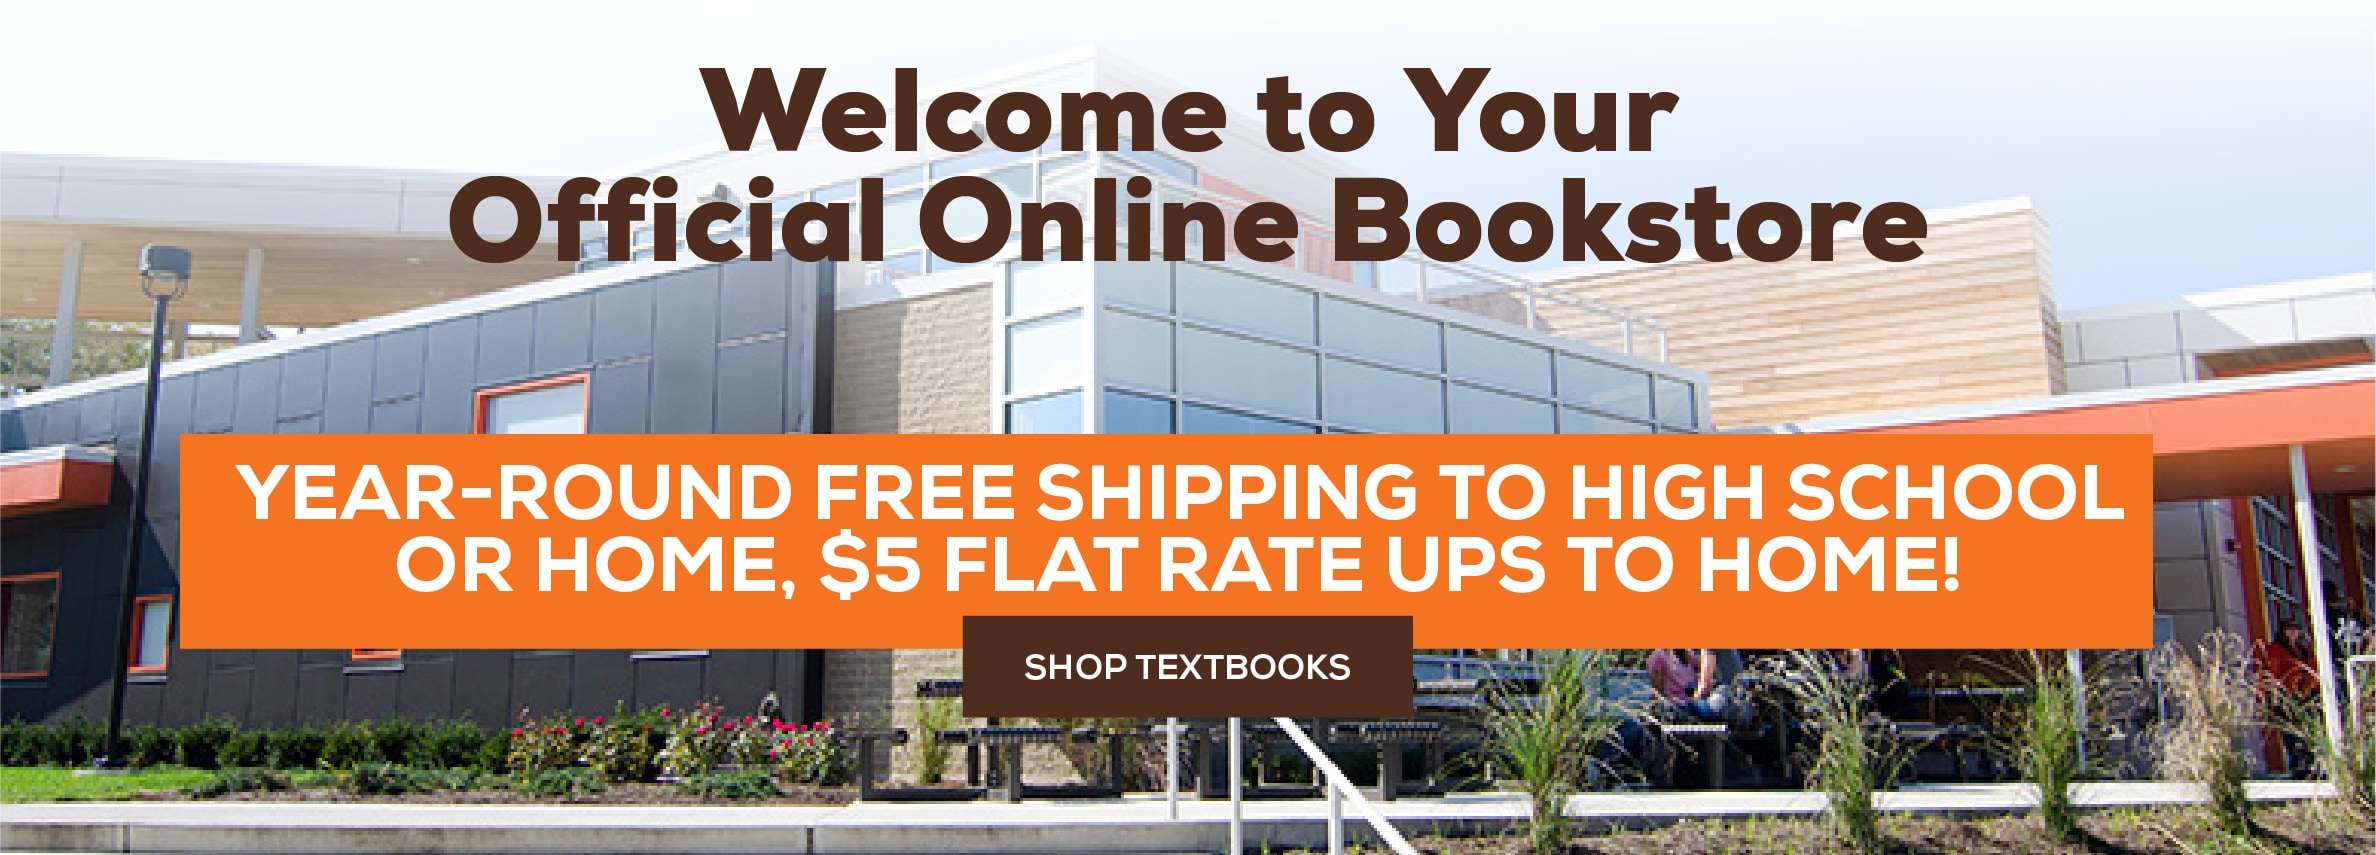 Welcome to Your Official Online Bookstore - Year Round Free shipping to High School or Home, $5 Flat Rate UPS To Home